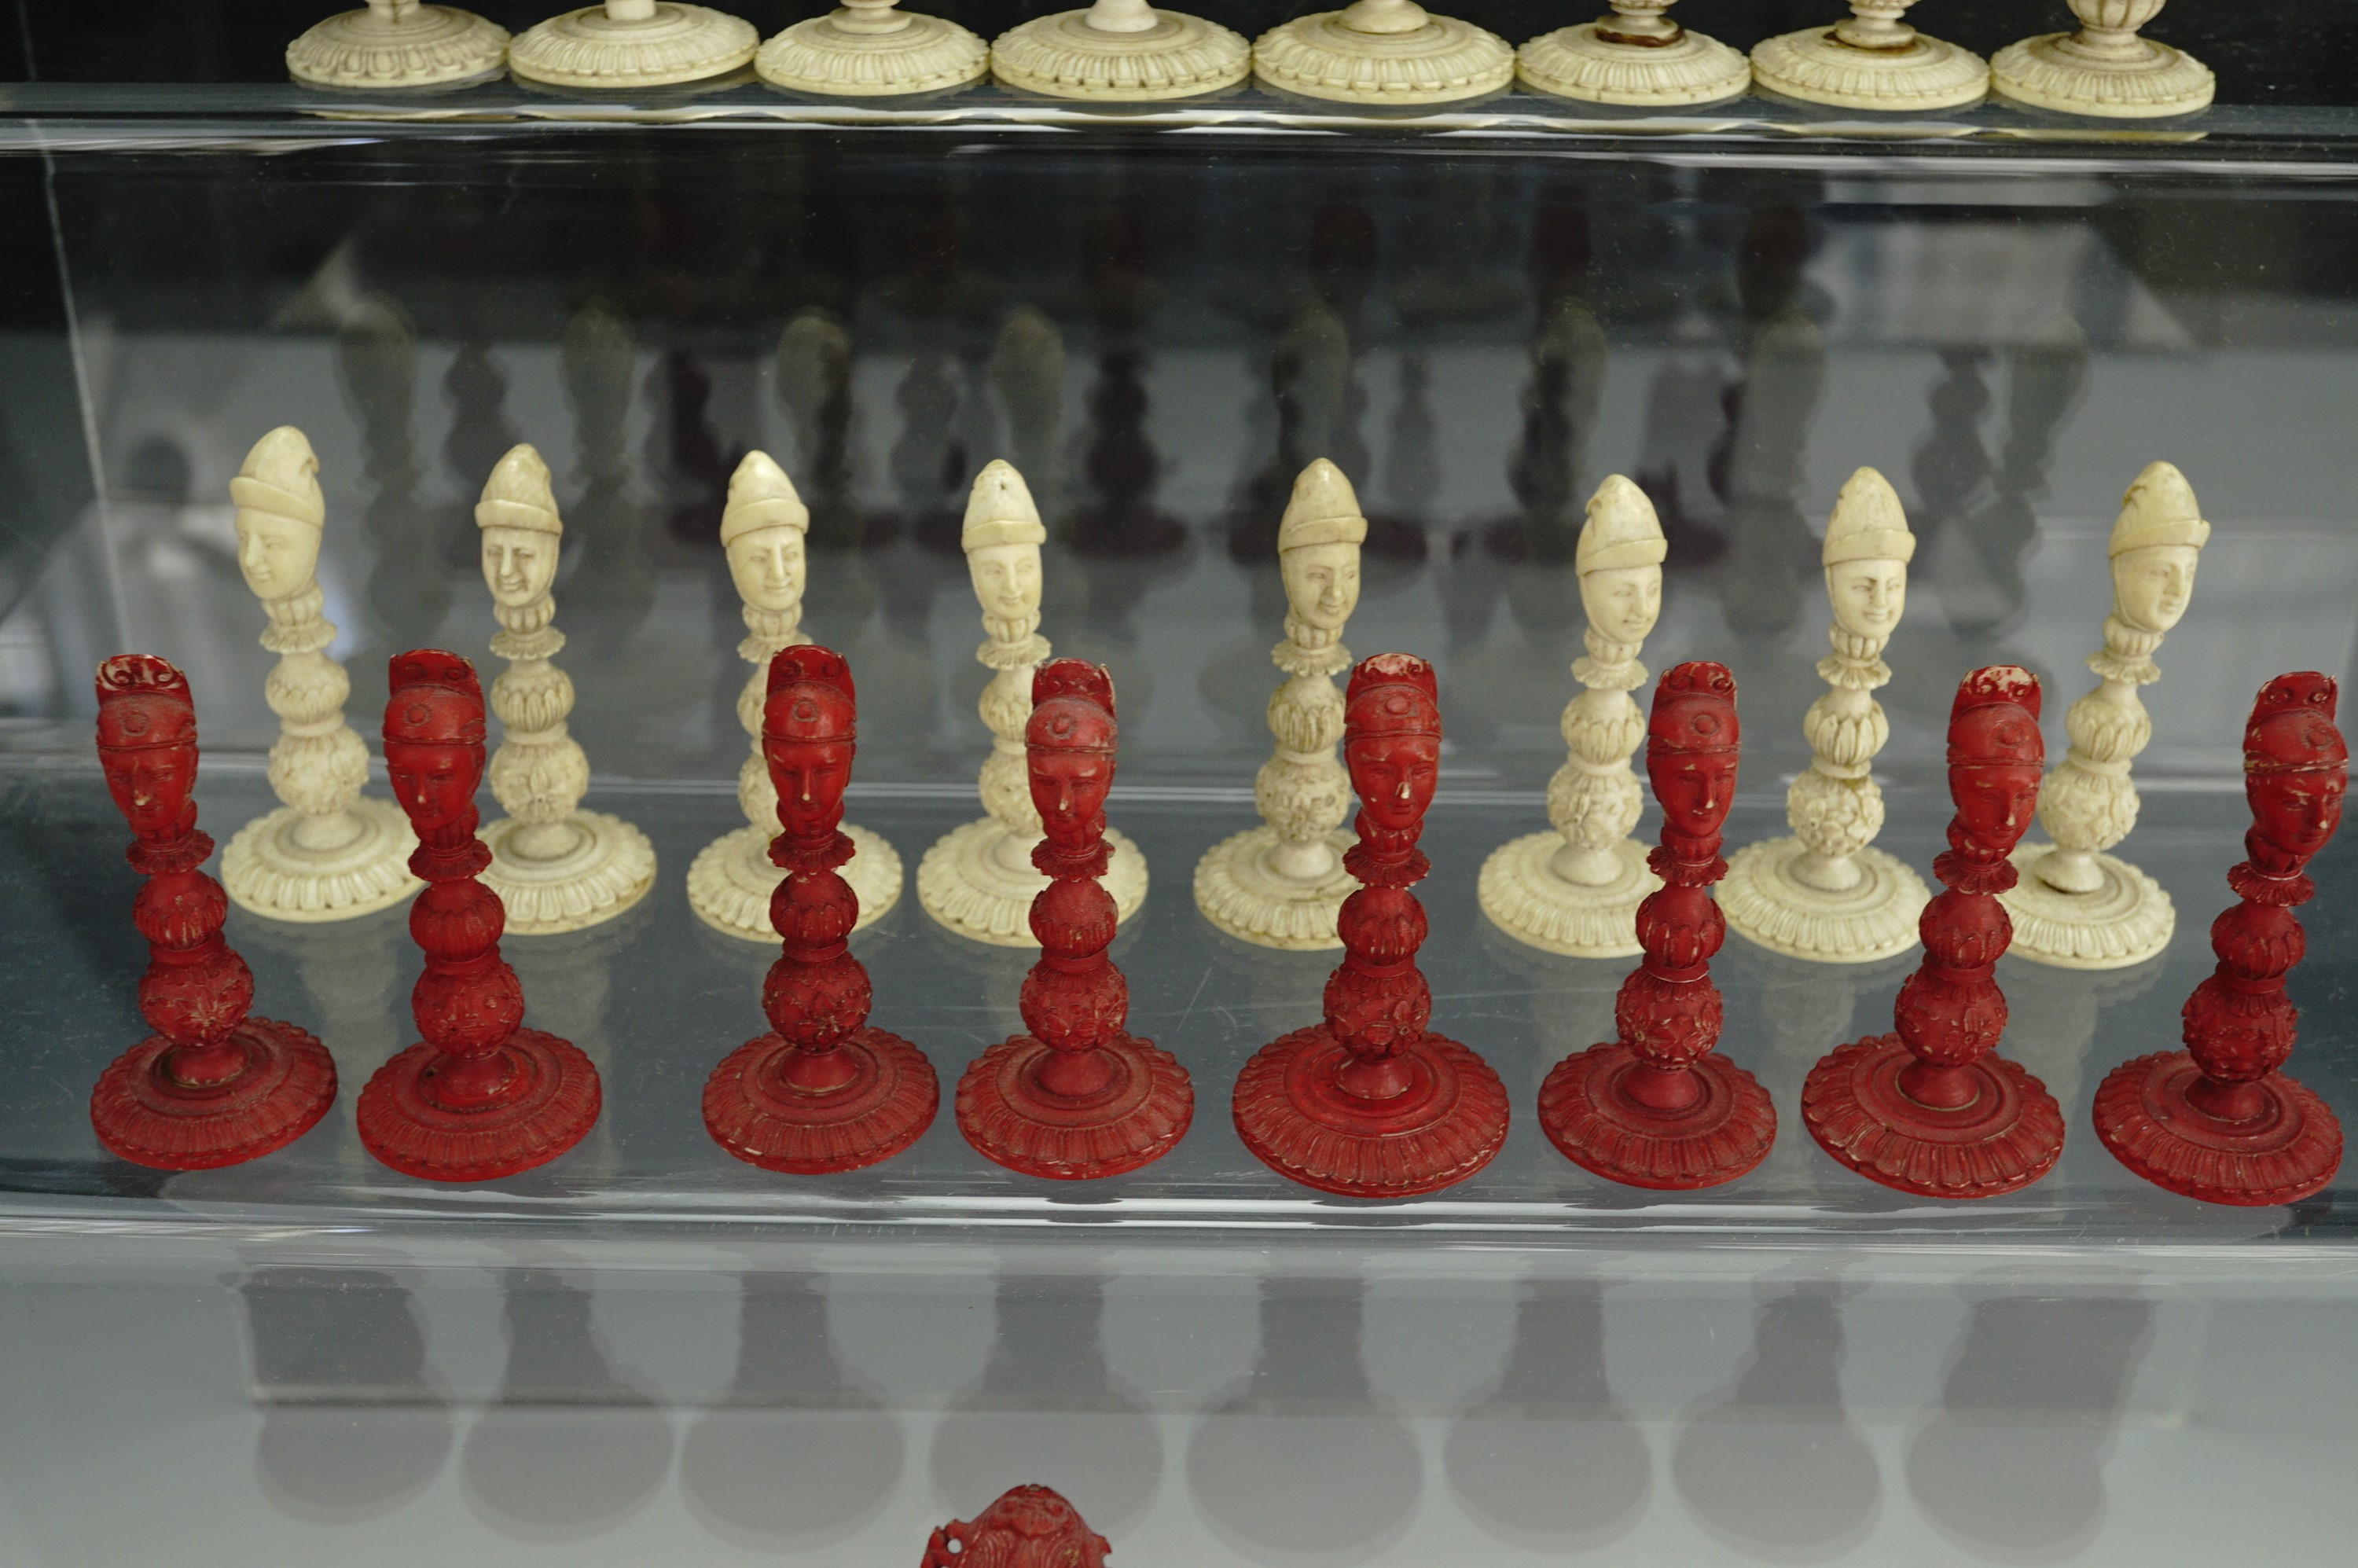 A late 18th / early 19th Century Chinese / Canton export ivory chess set, likely Macau, Kings - Image 5 of 7